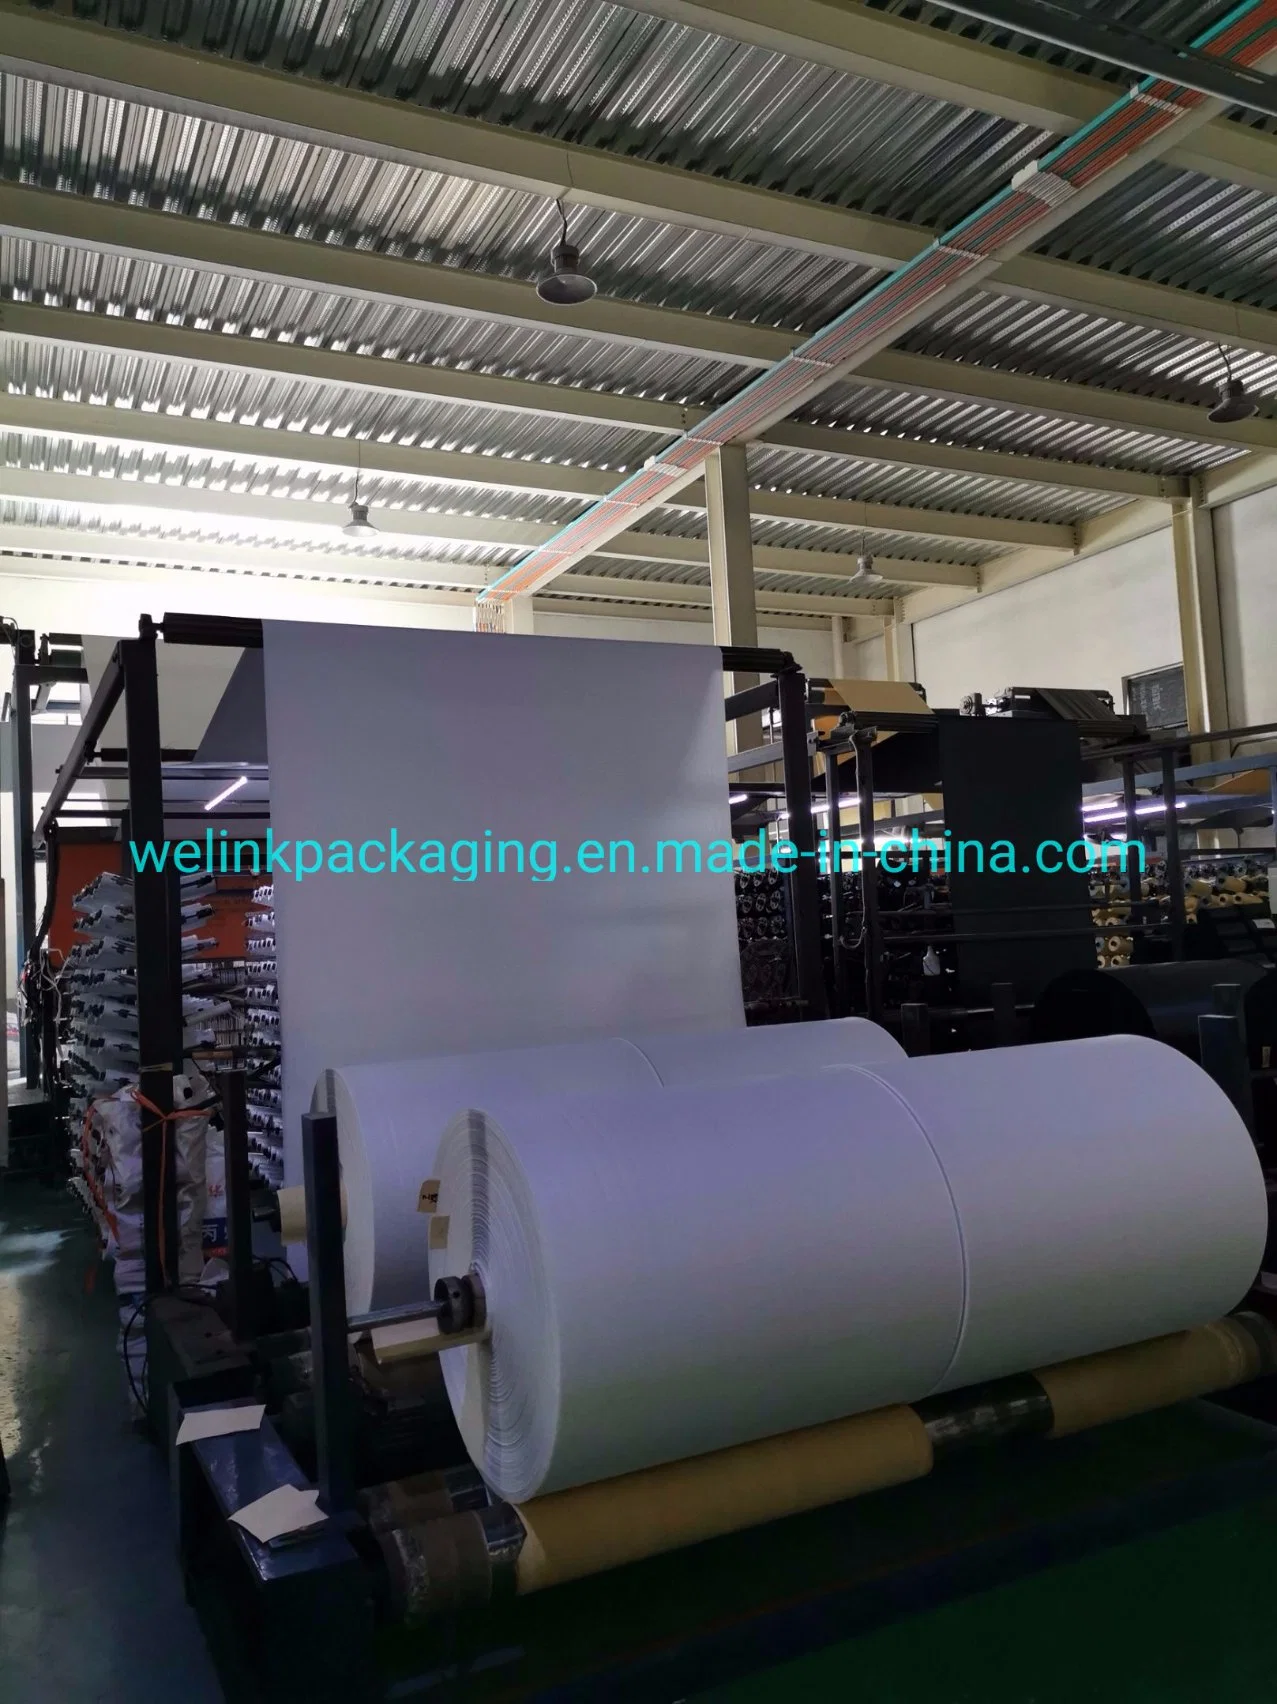 China Wholesale/Supplier PP /PE Woven Fabric Roll 0.3m-6.4m Width